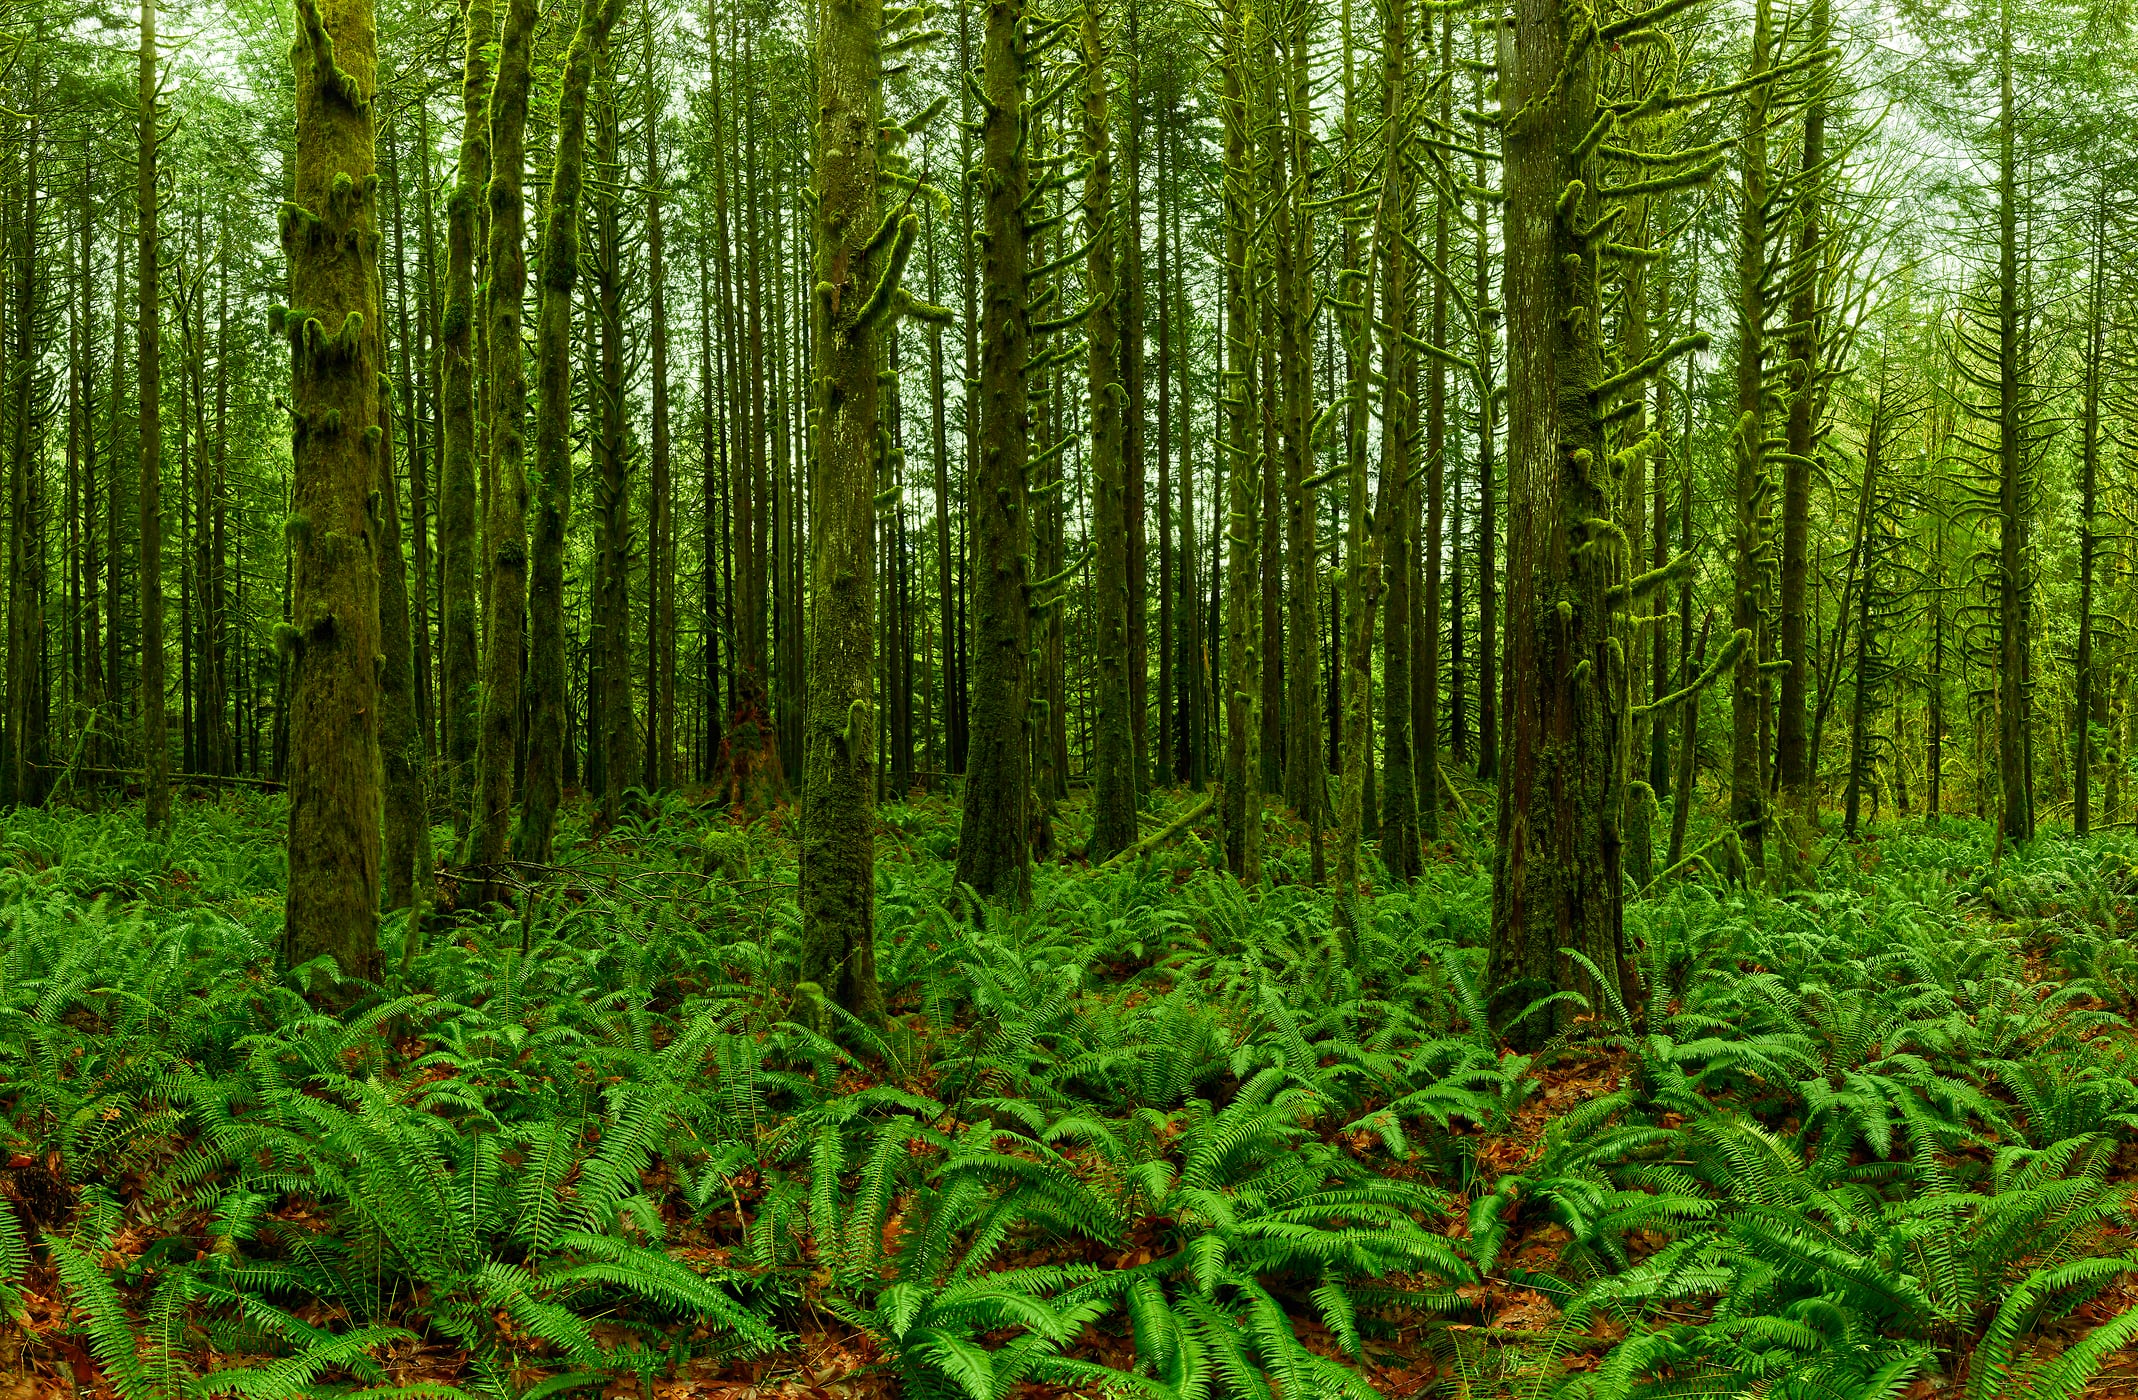 866 megapixels! A very high resolution, large-format VAST photo print of a forest with many ferns on the ground; nature photograph created by Chris Collacott.